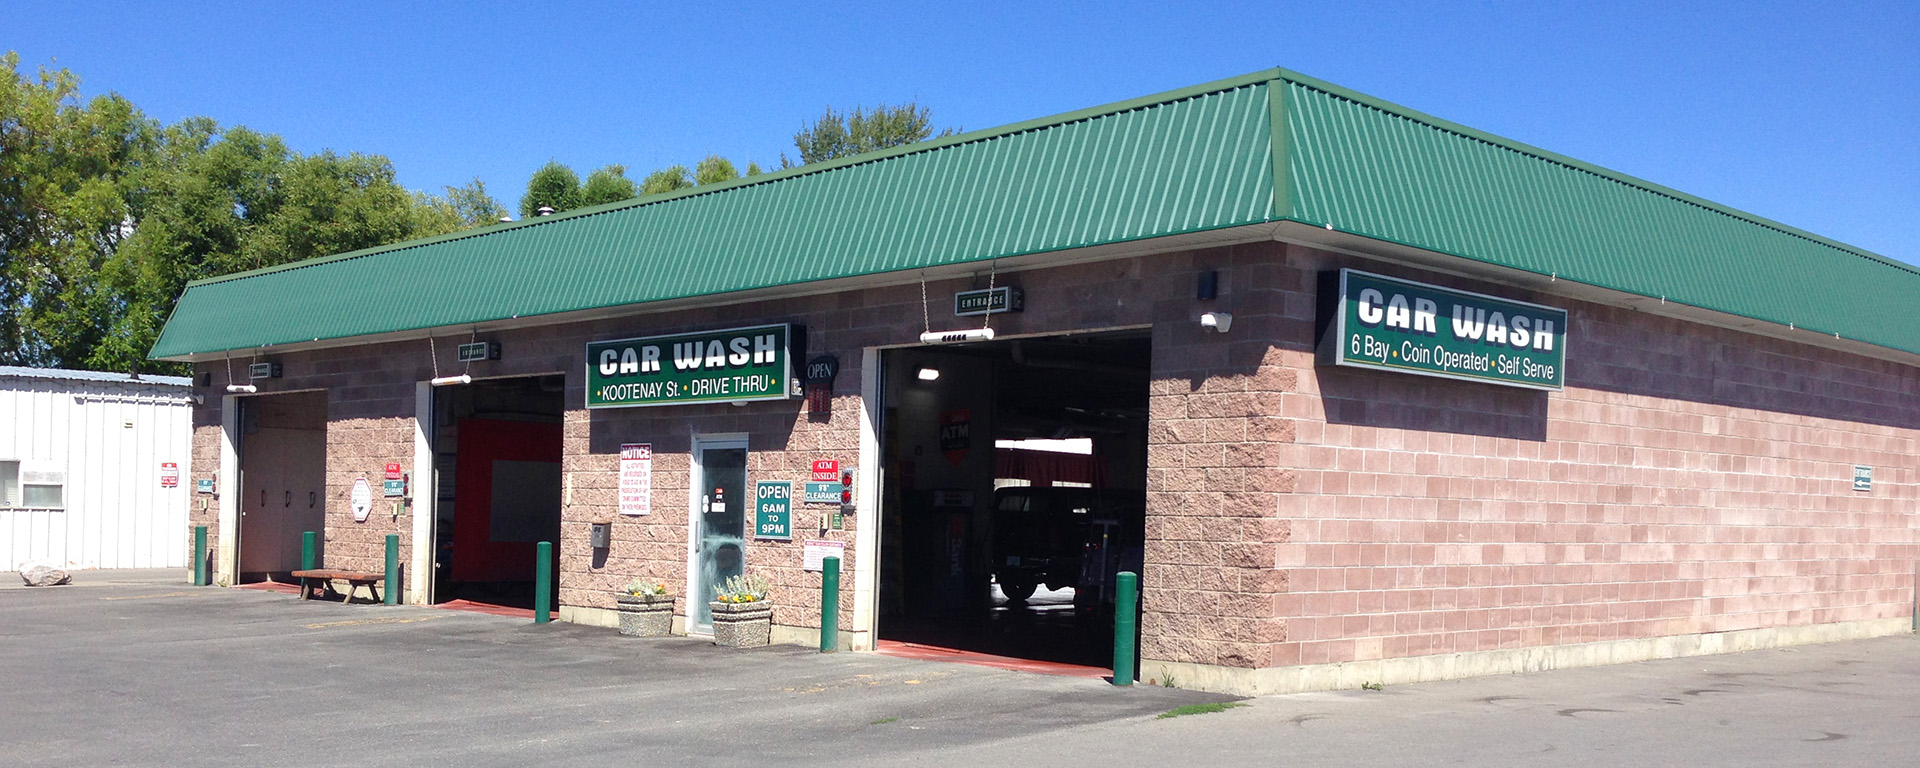 Exterior of Kootenay Street Carwash in Cranbrook, with an open washing bay and a sign out front that says “Car wash” in large white letters. 